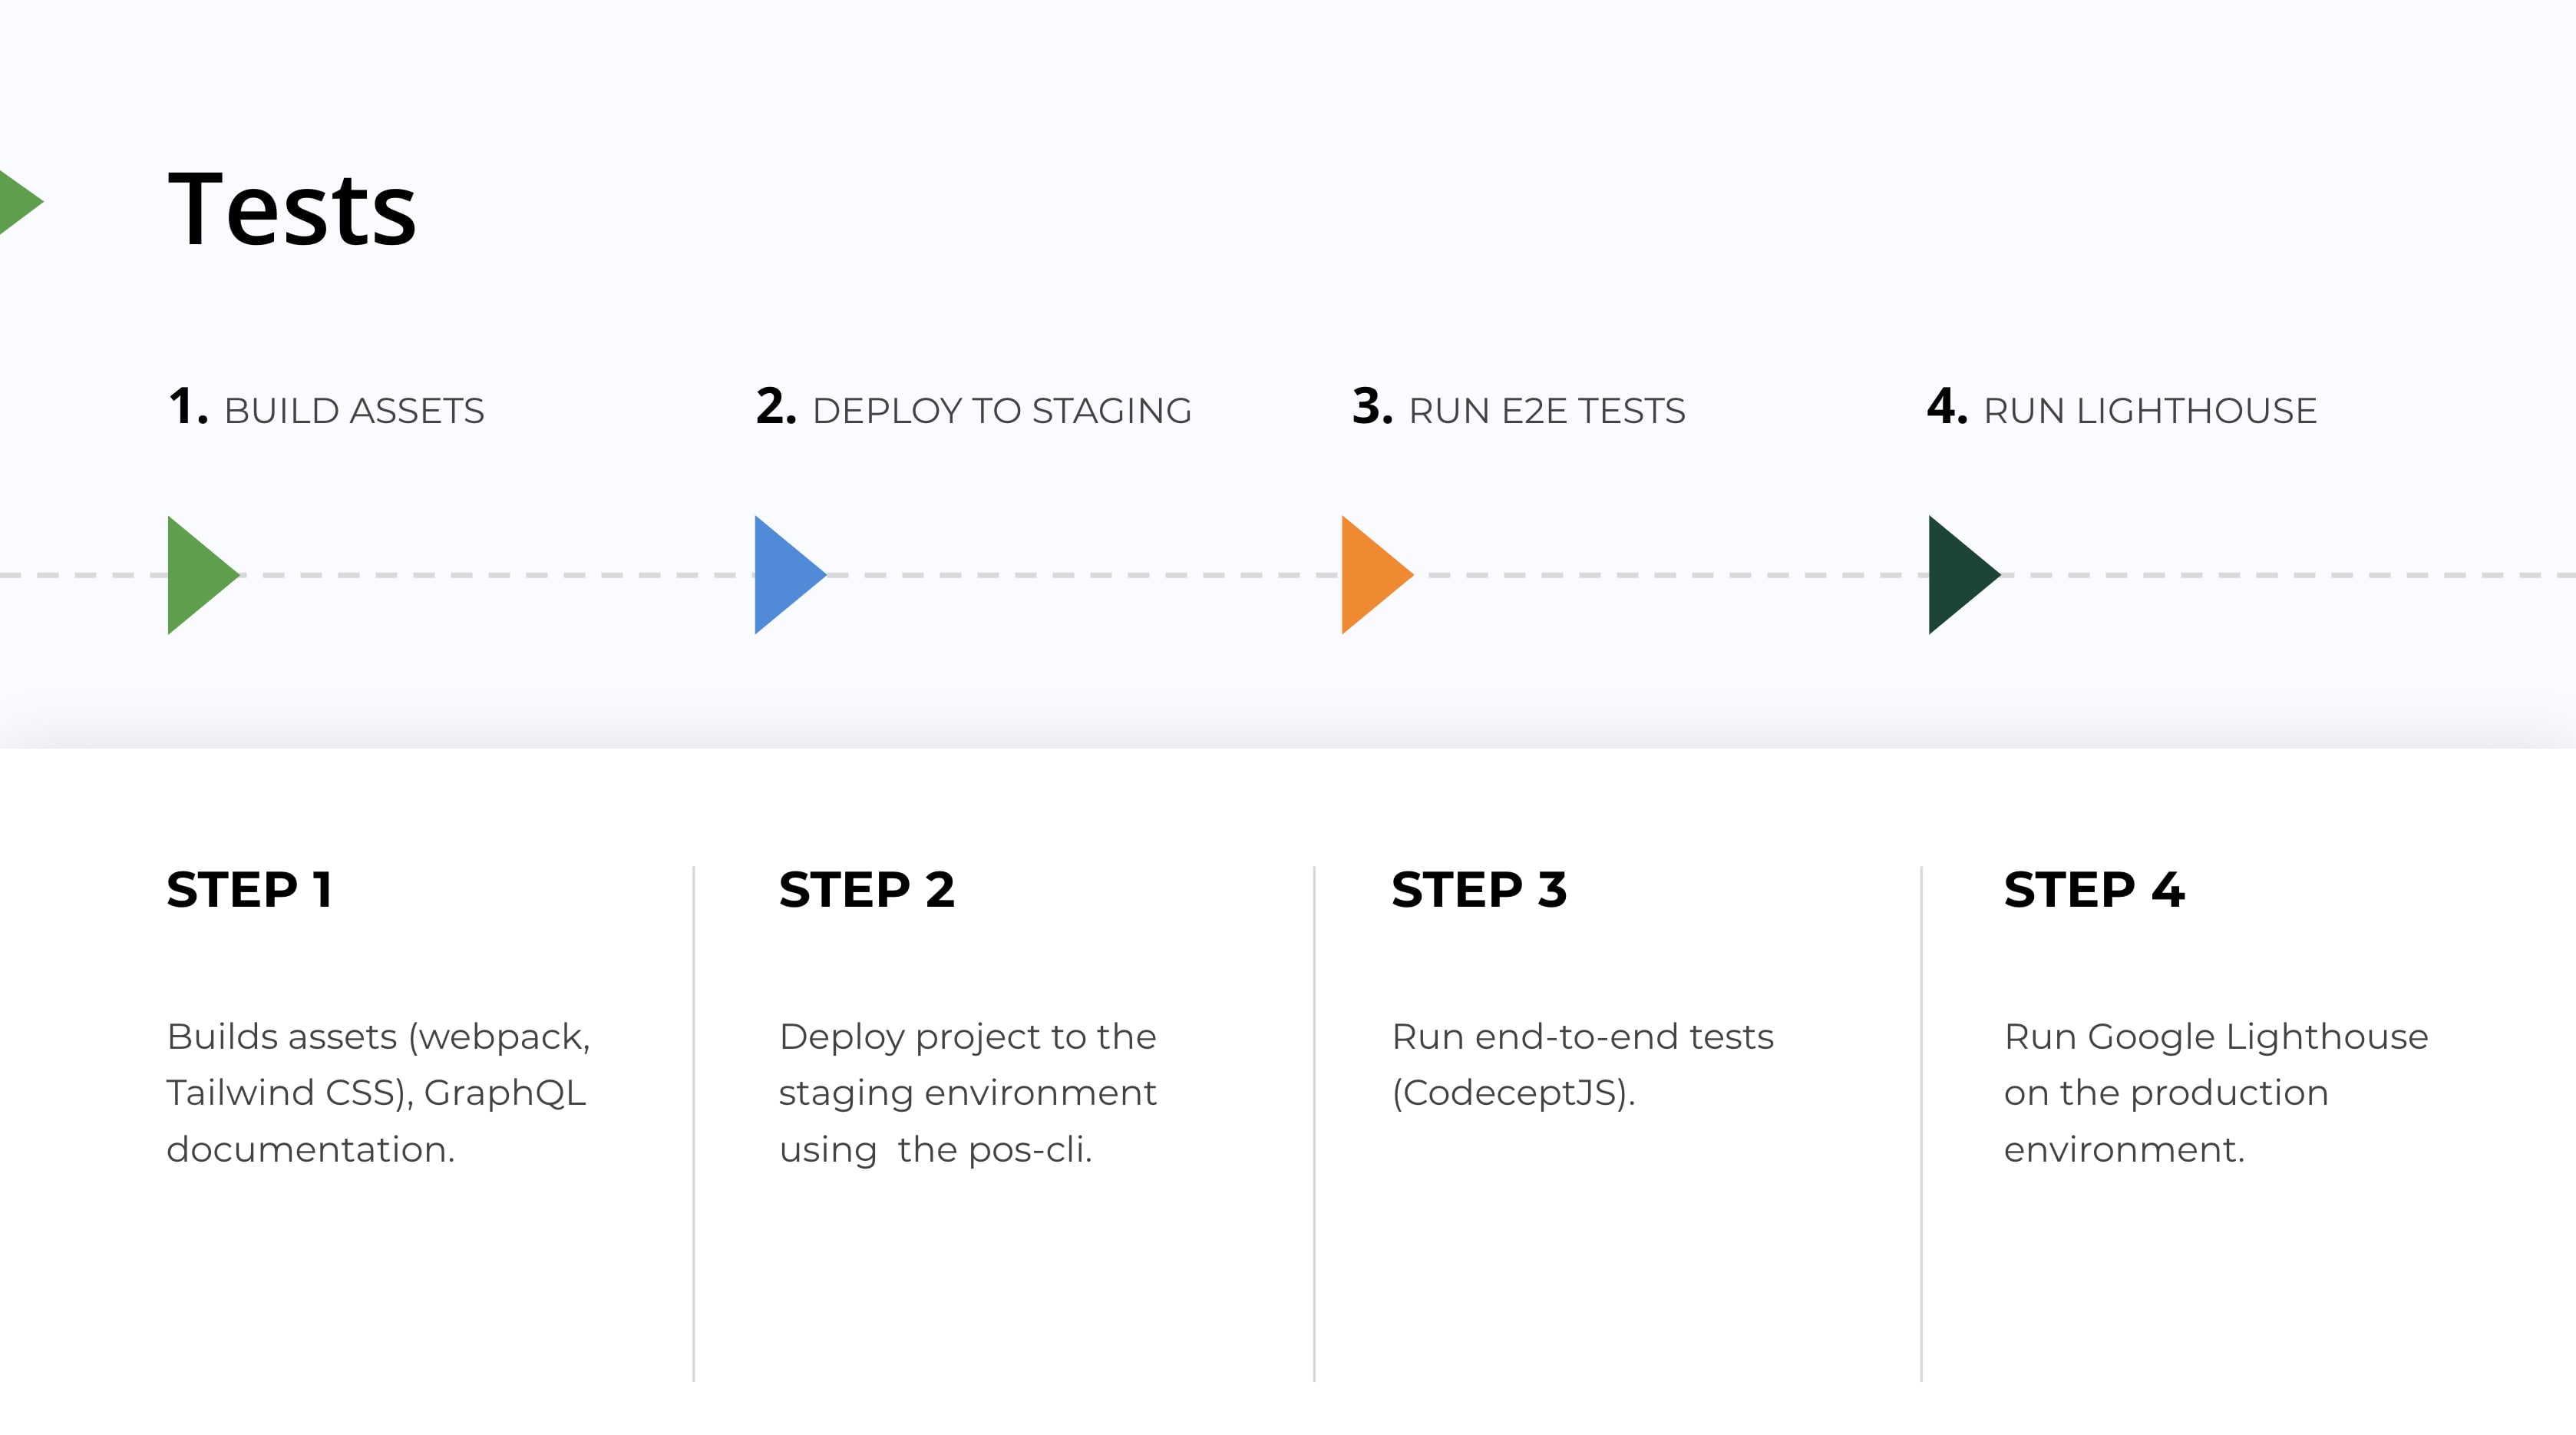 The steps in our testing process